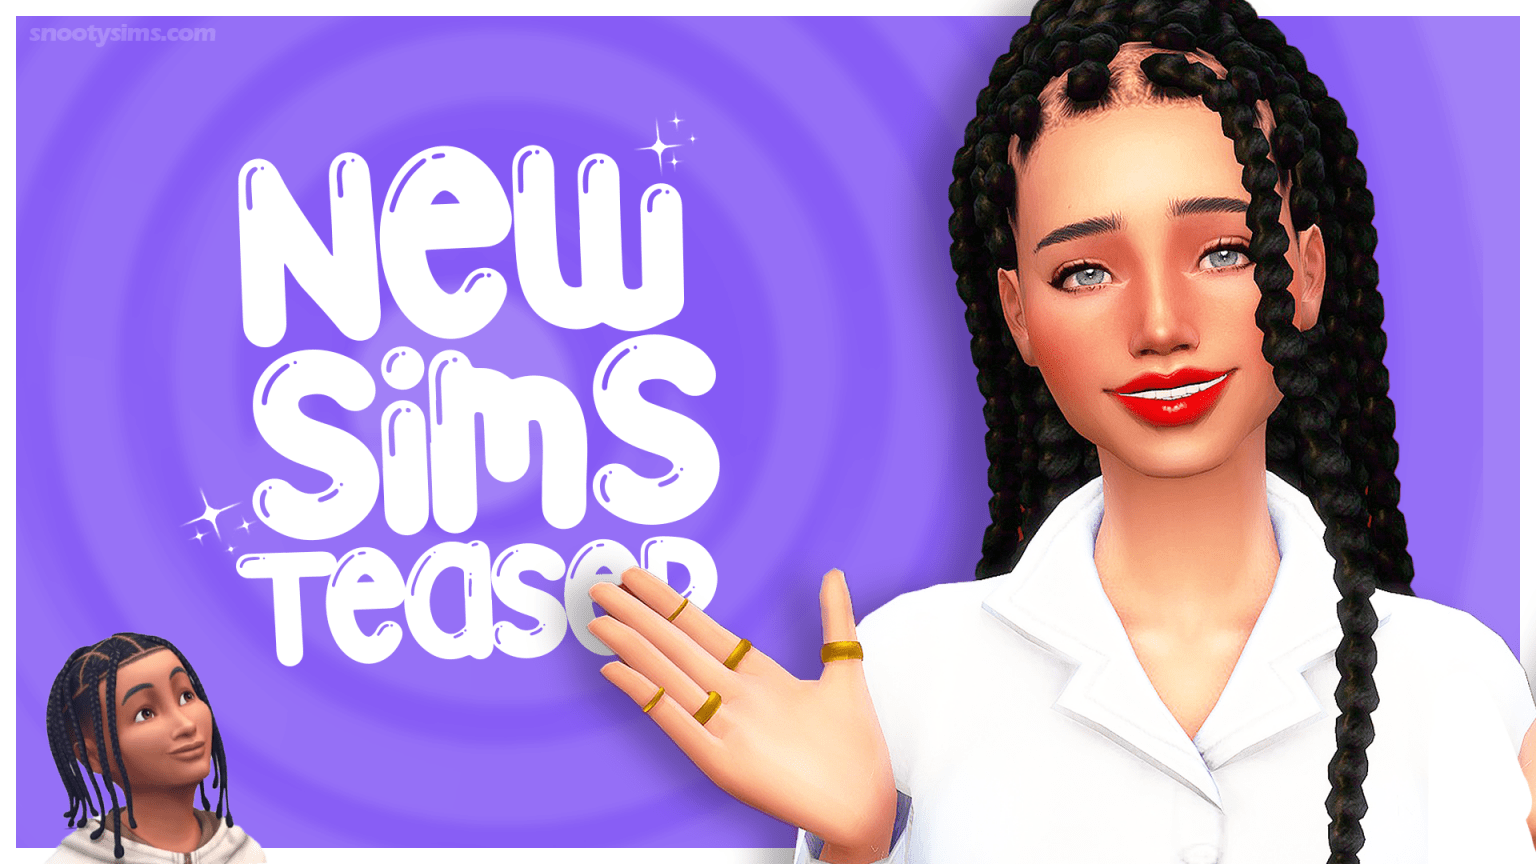 It's All Relative! New Sims 4 Teaser is Here! This is What We Can